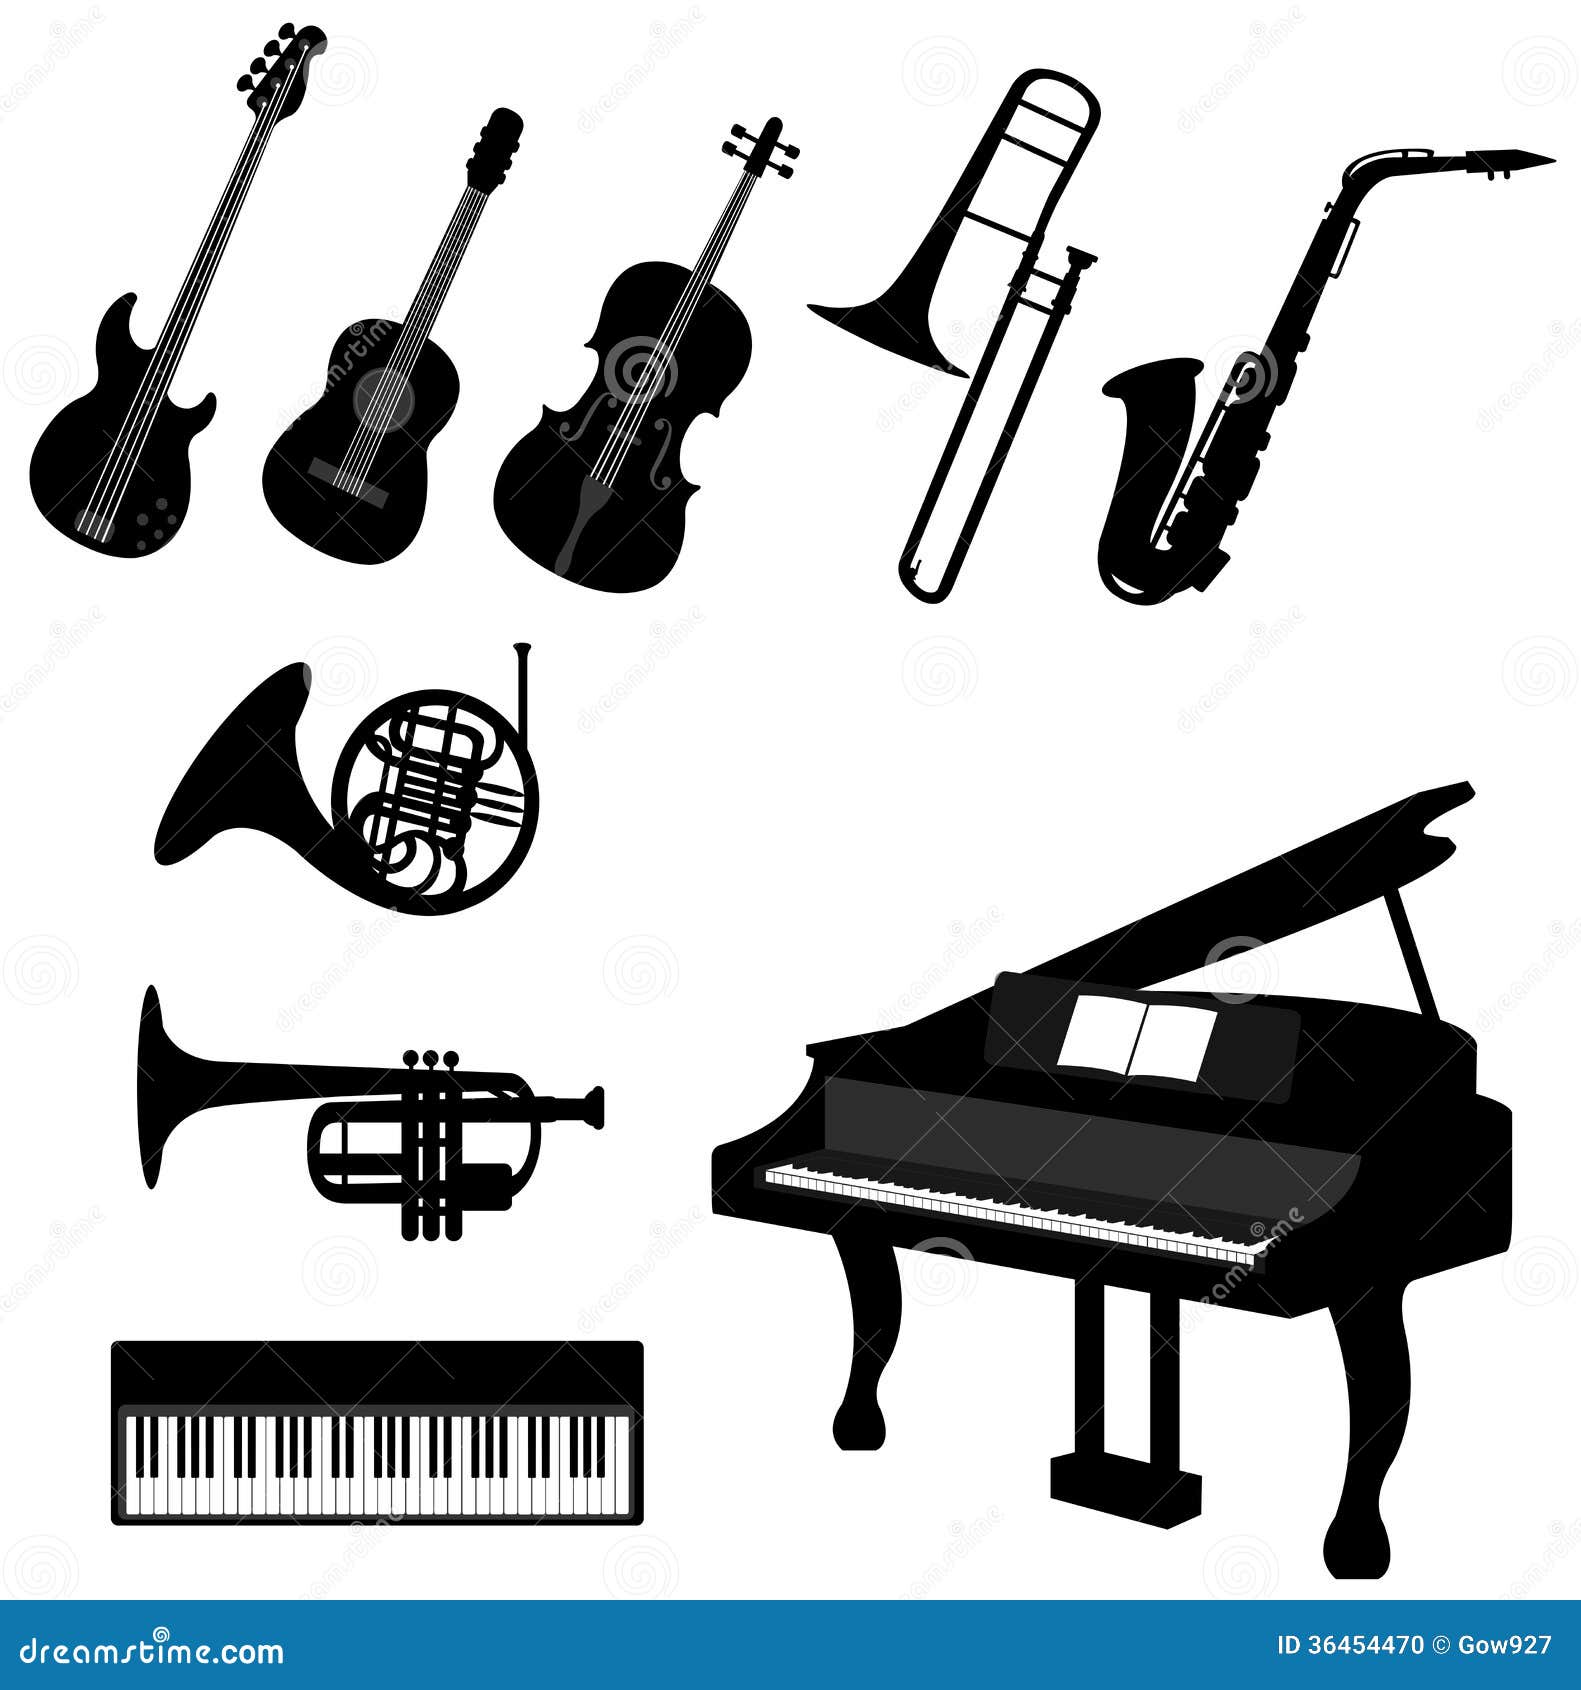 set of silhouette musical instrument icons